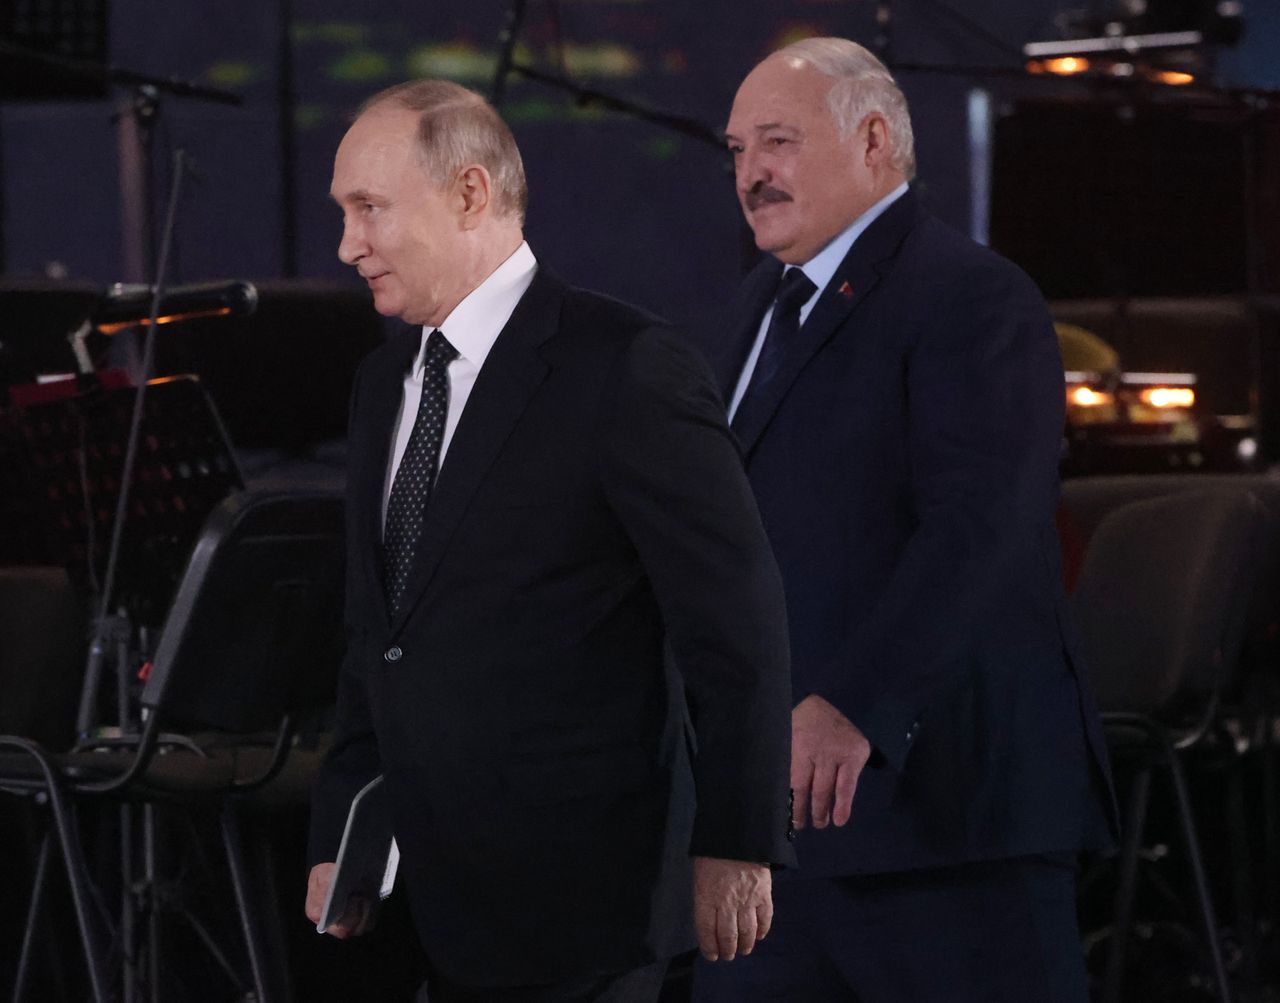 Dictators gather in Russia, Lukashenko harshly criticizes Poland in WWII commemoration speech